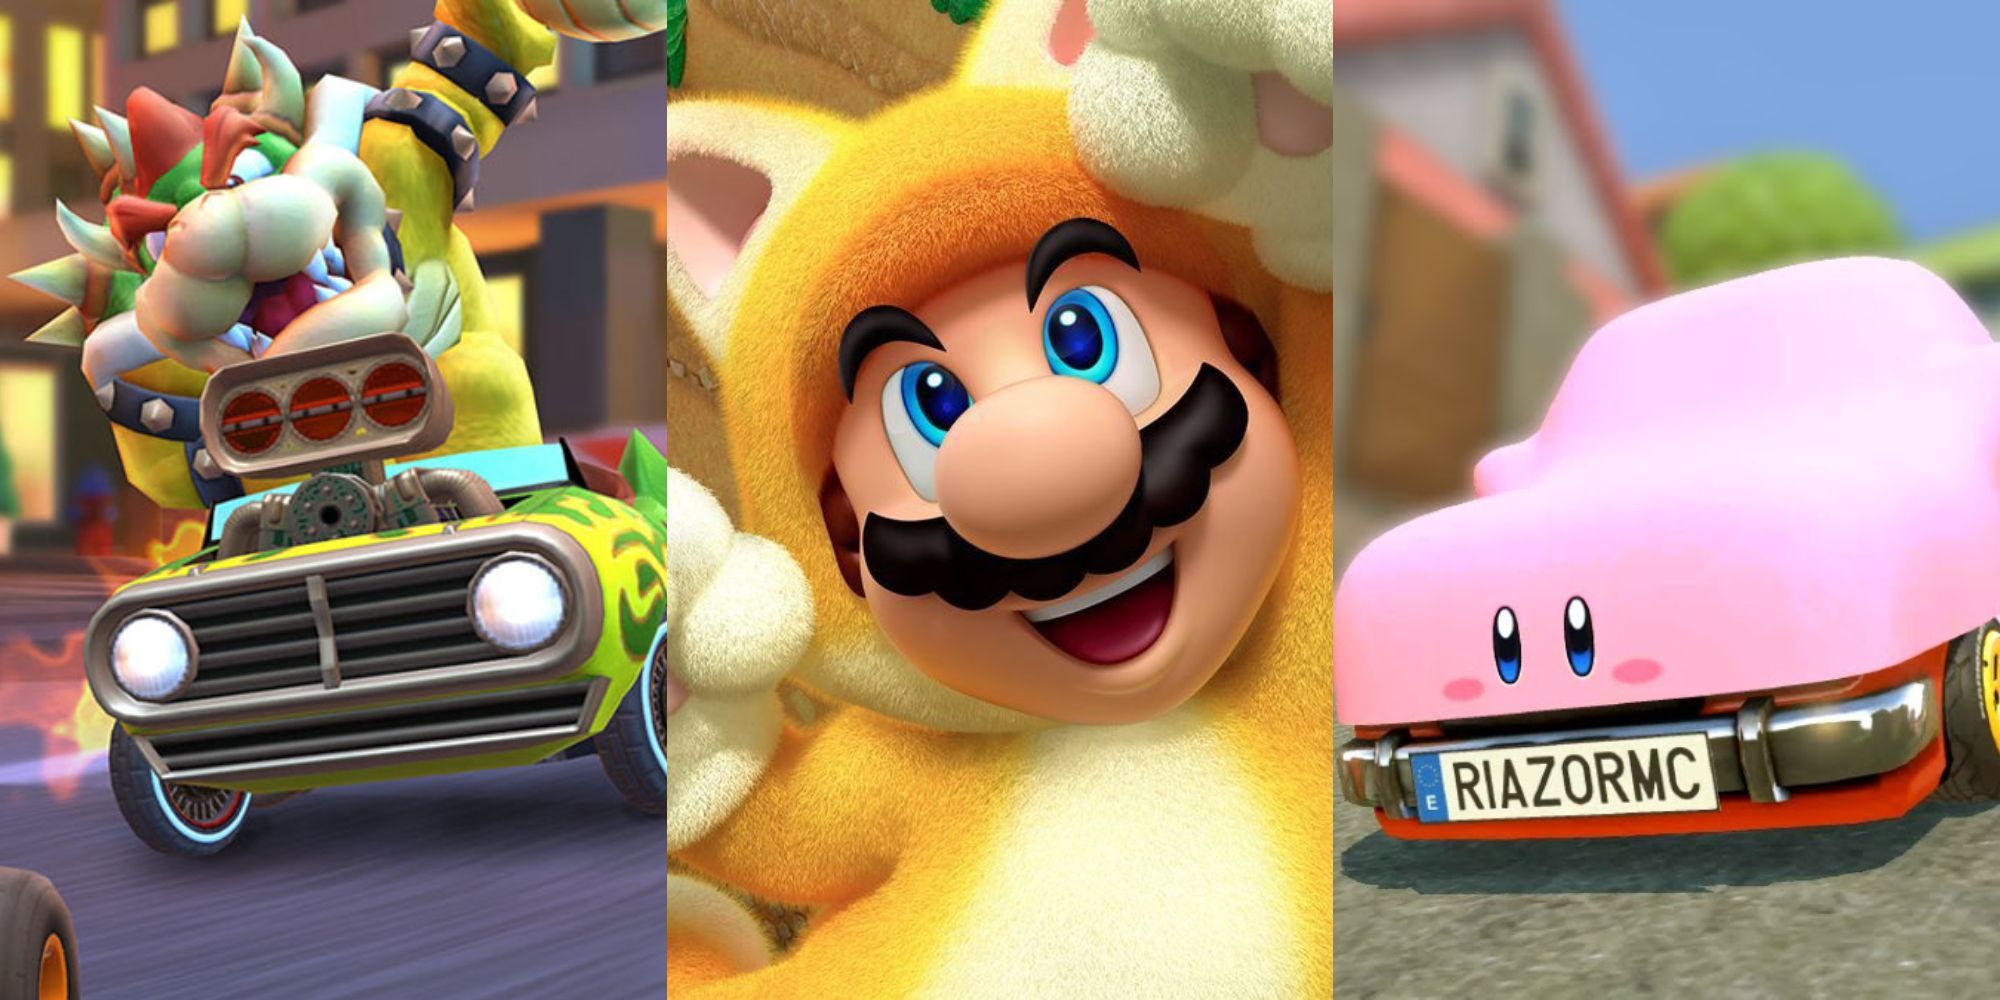 Bowser from Mario Kart, Mario in a cat suit, and car Kirby